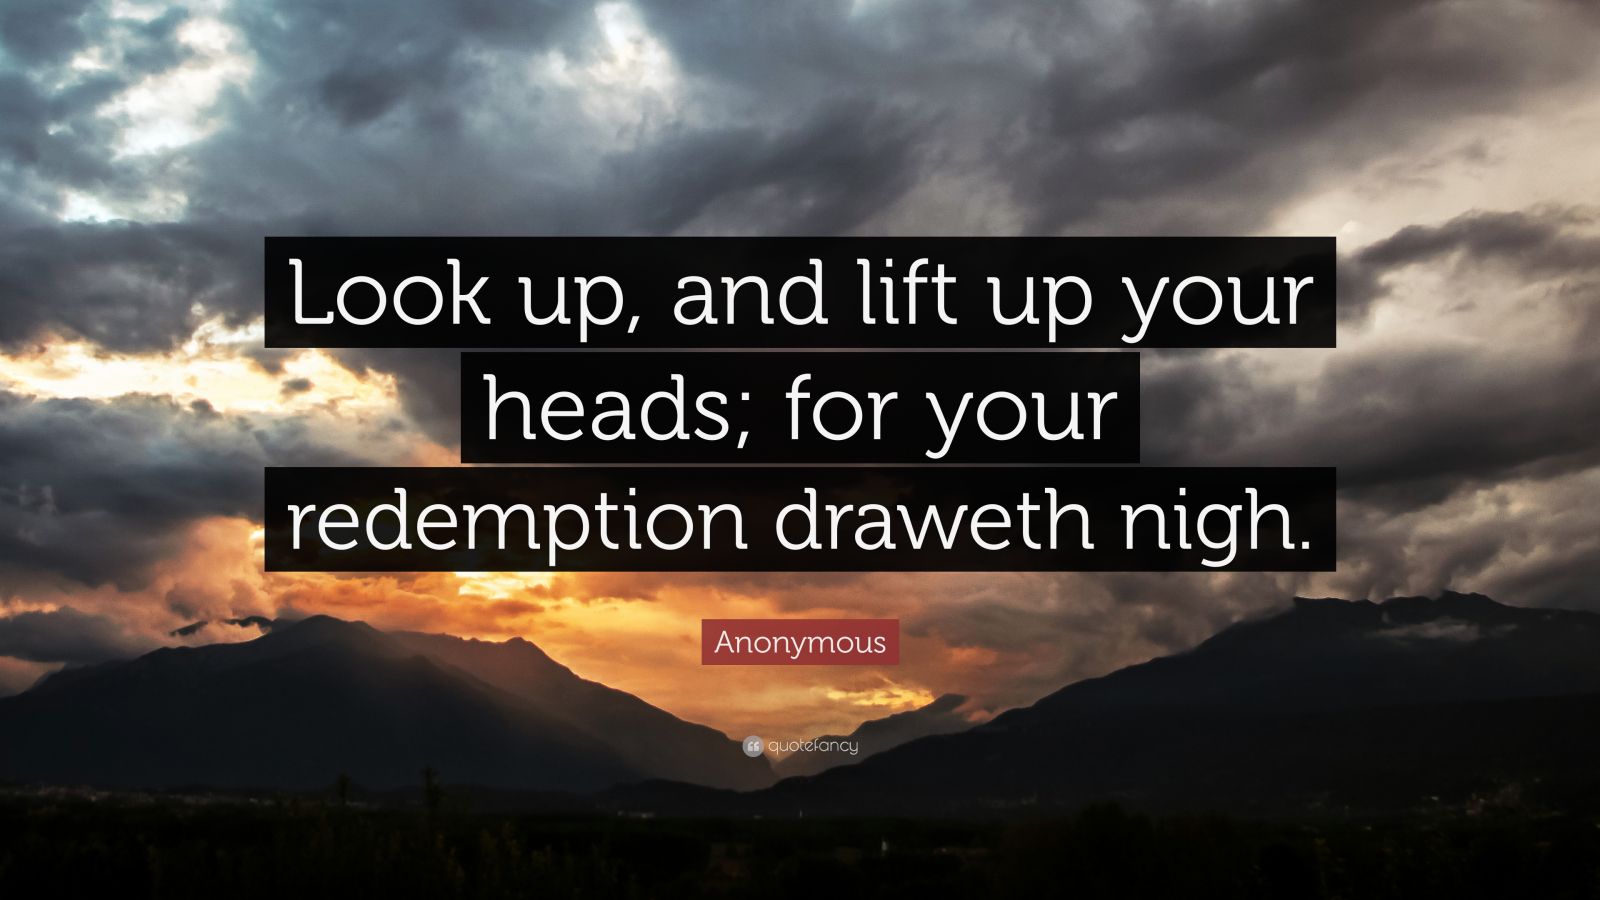 Anonymous Quote “Look up, and lift up your heads; for your redemption